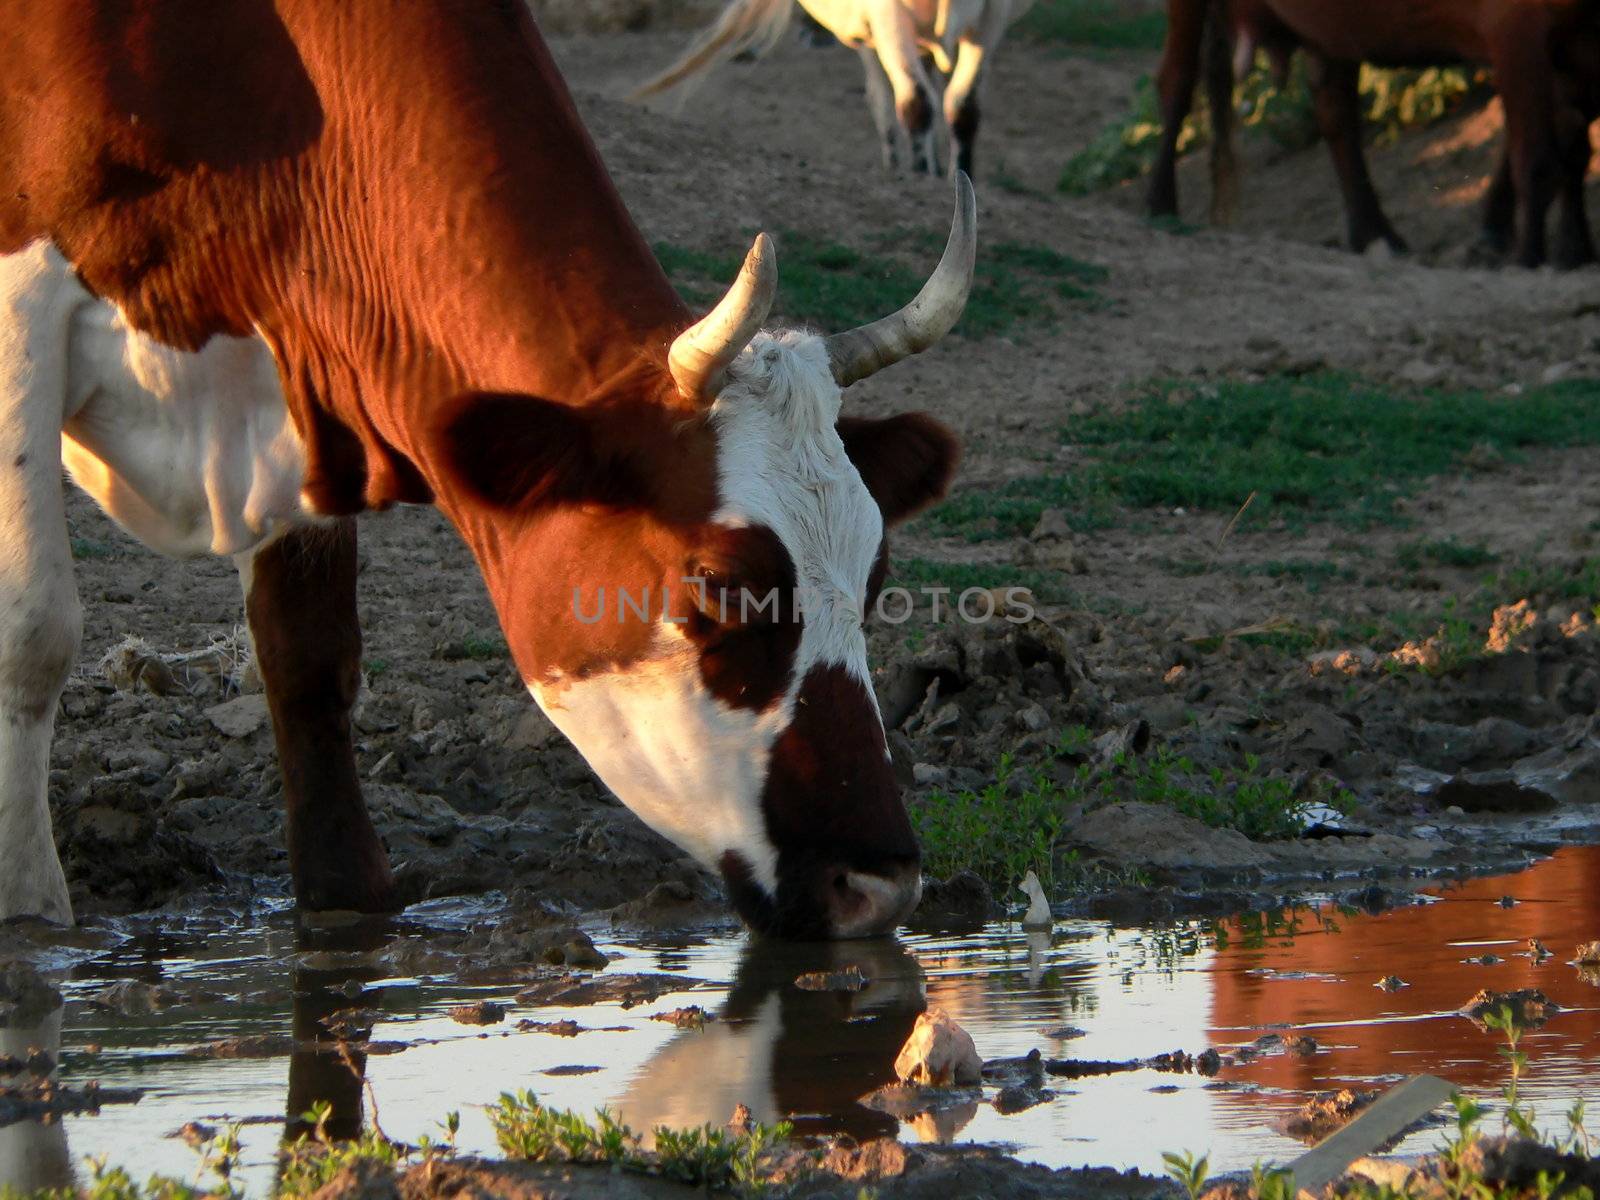 Rural. Cow beside puddles.